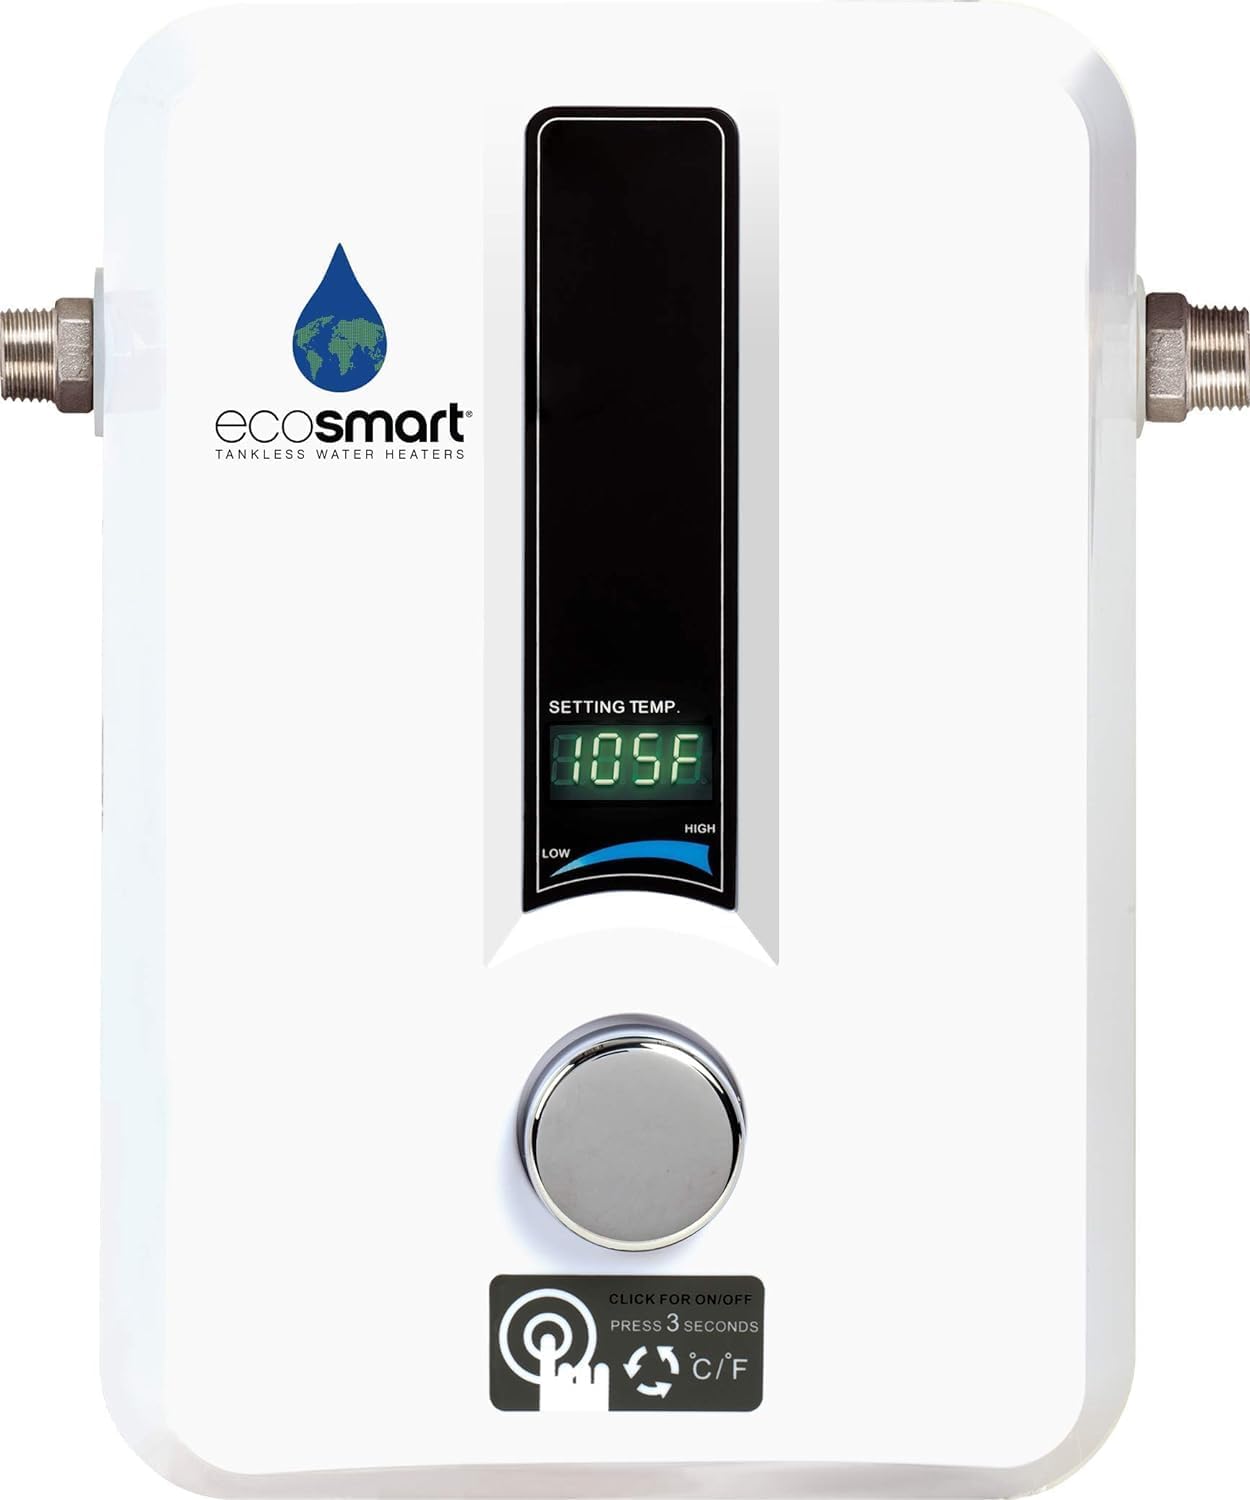 EcoSmart ECO 11 Water Heater Review